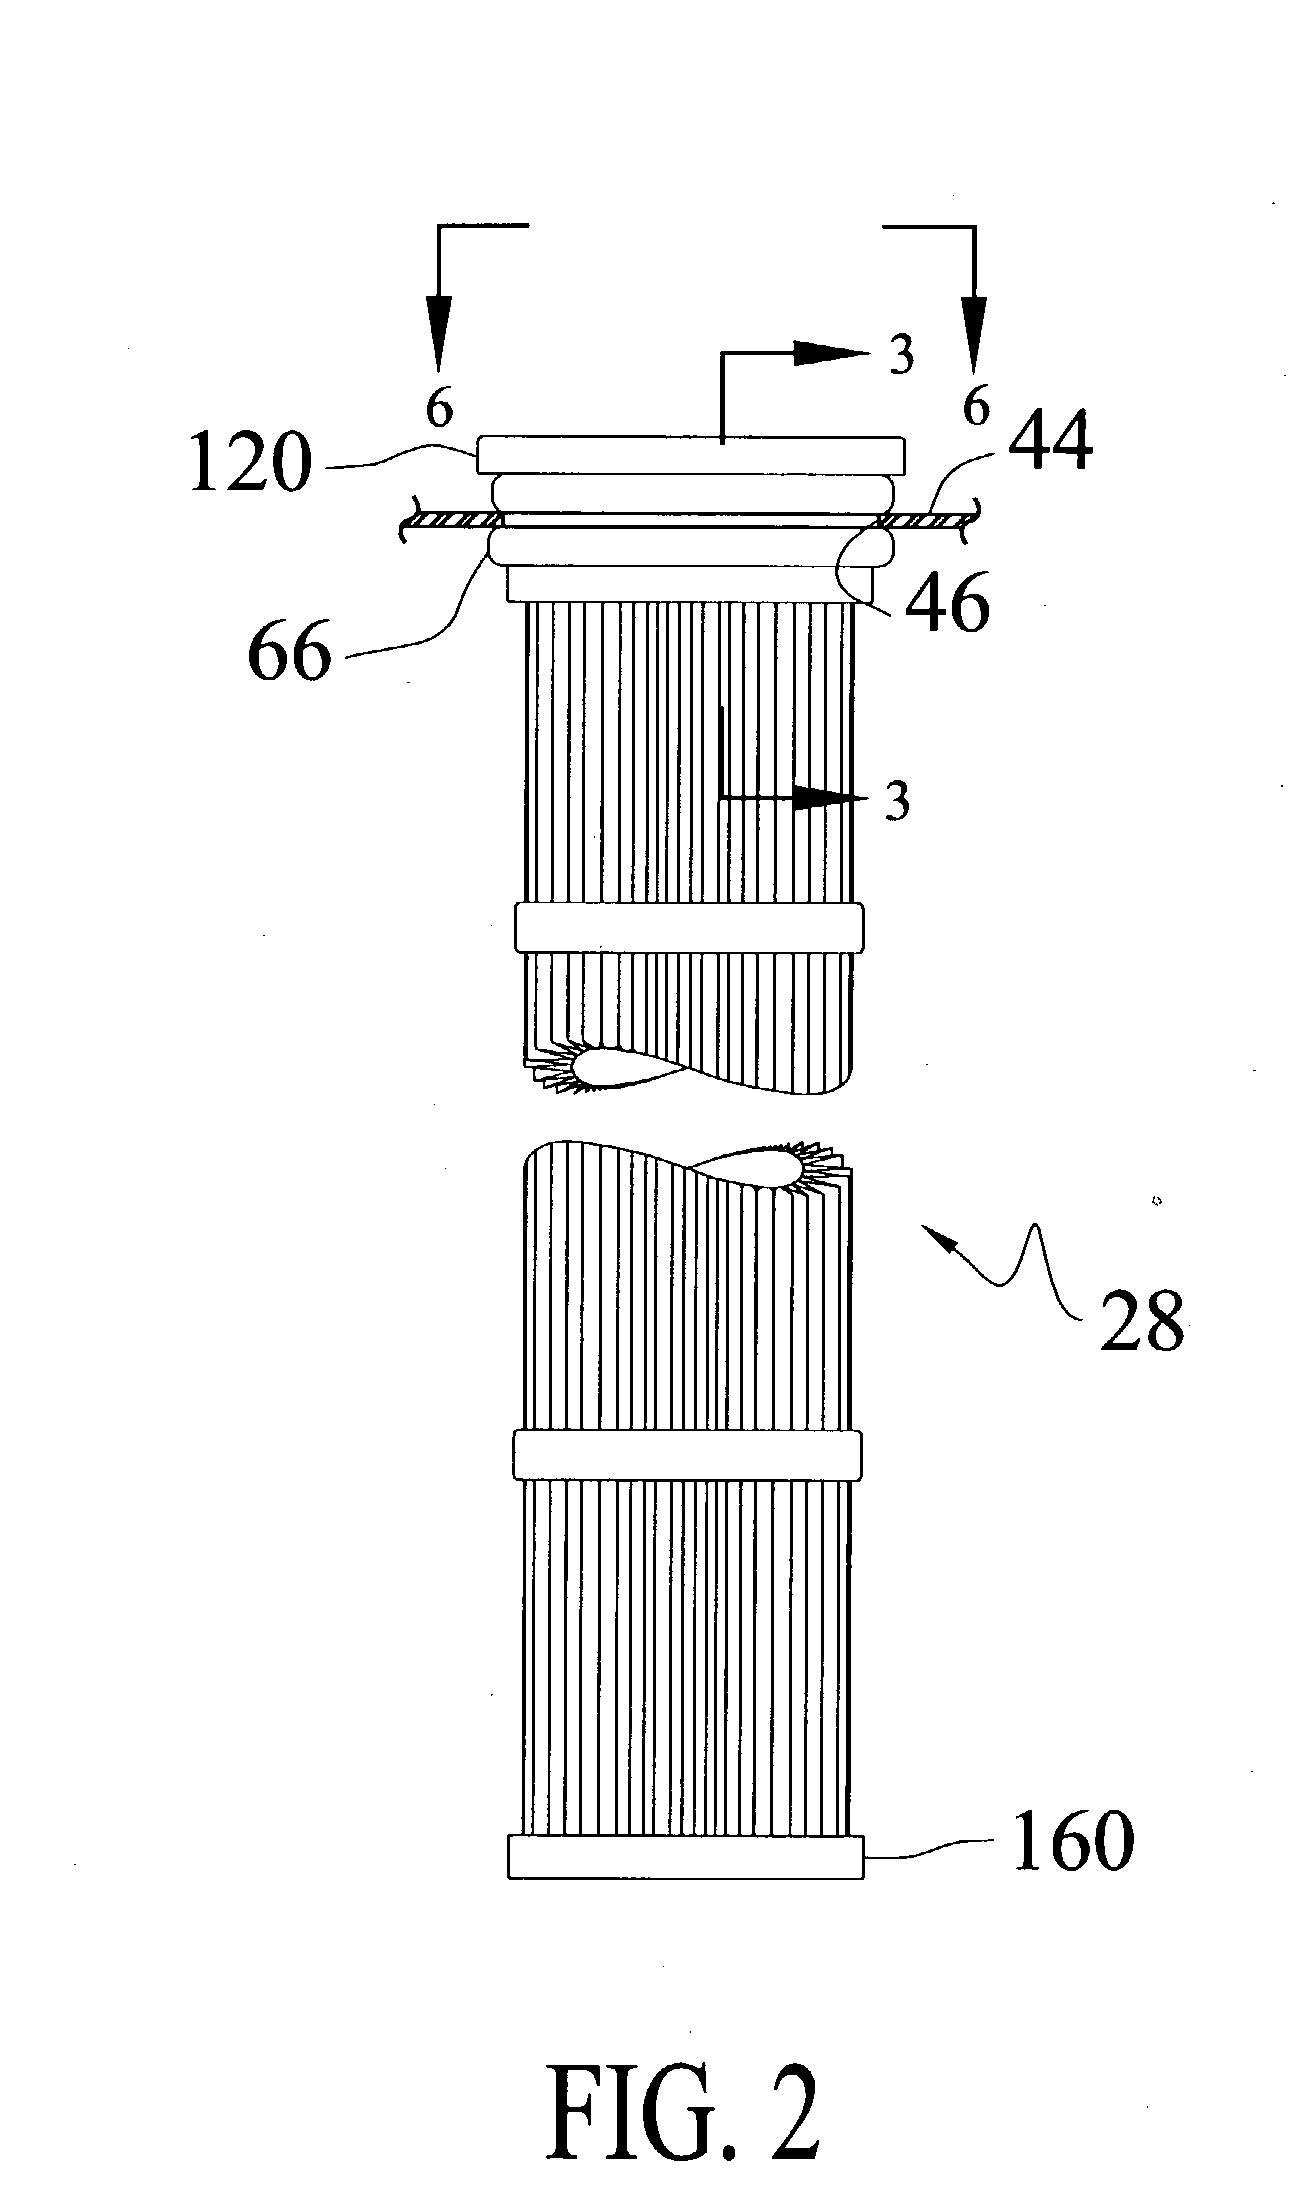 Filter cartridge mounting structure